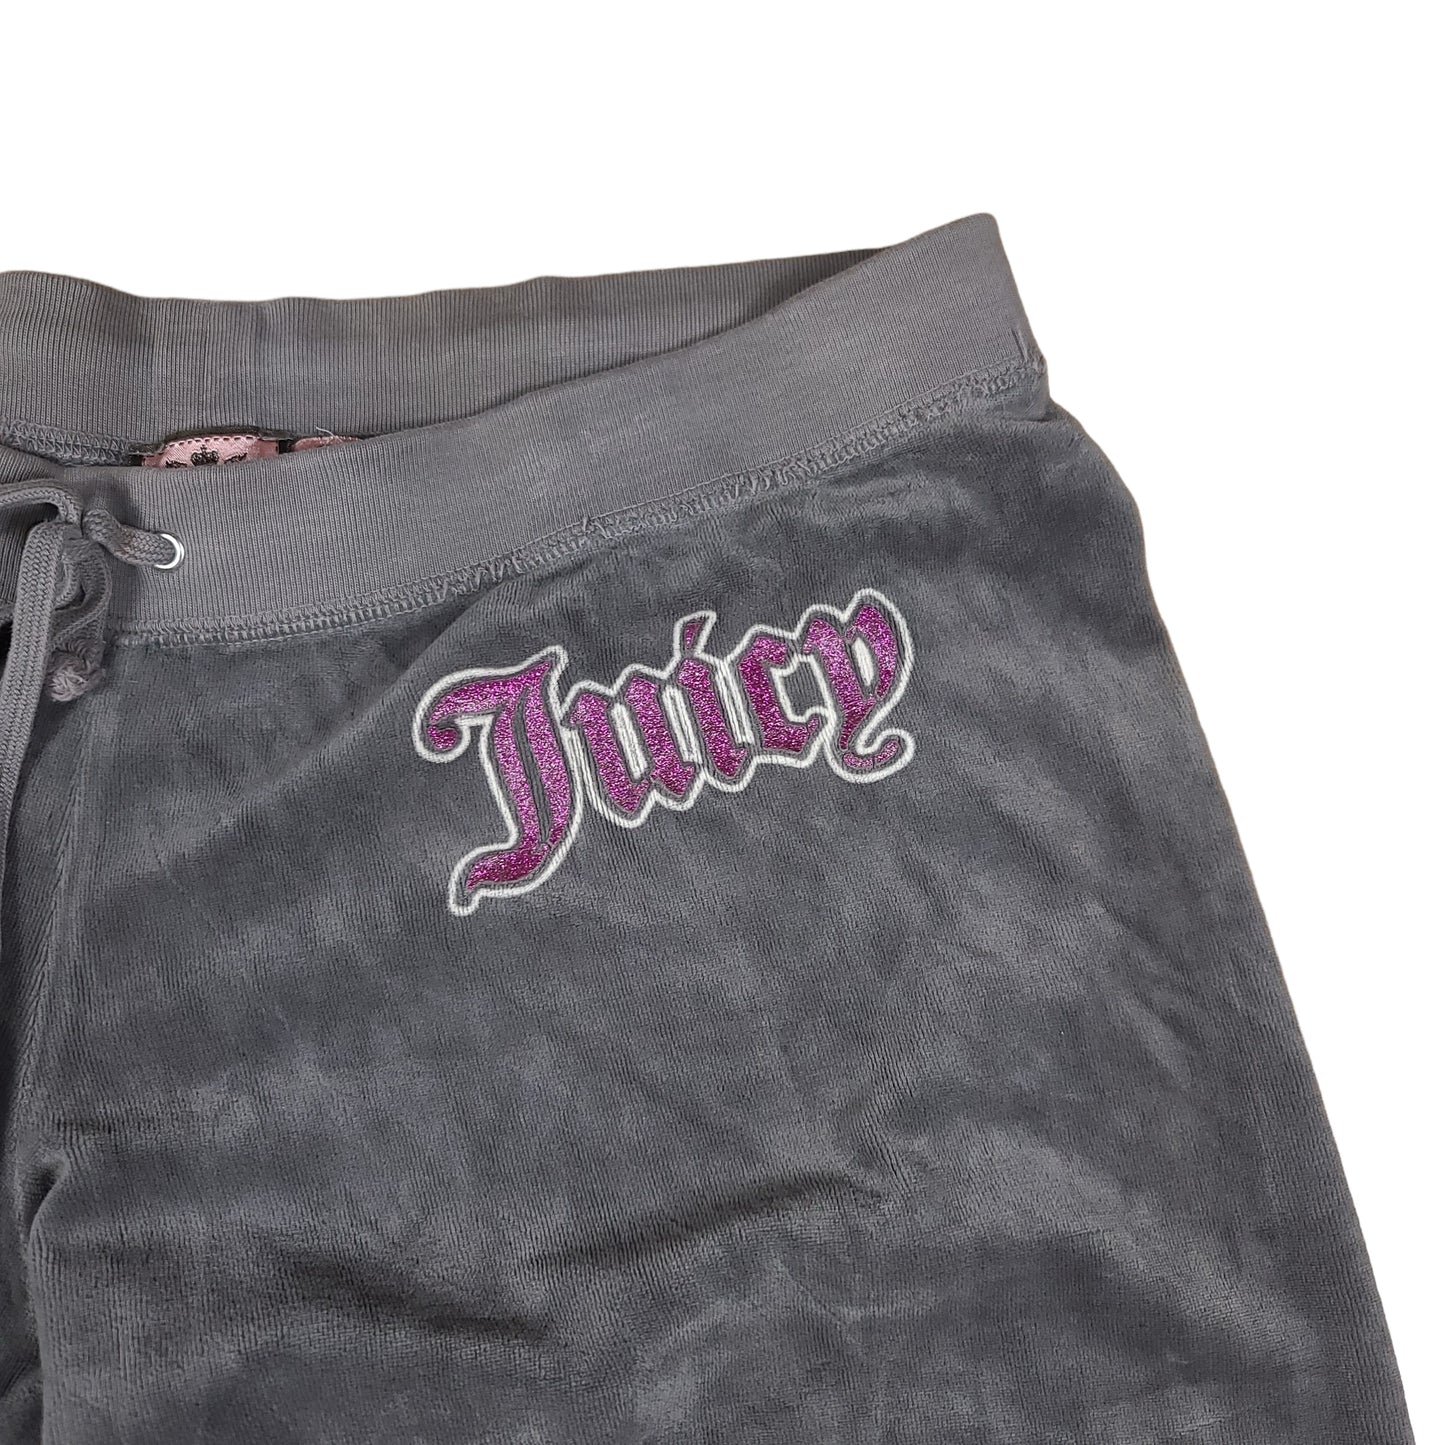 Juicy Couture Gray Sweatpants